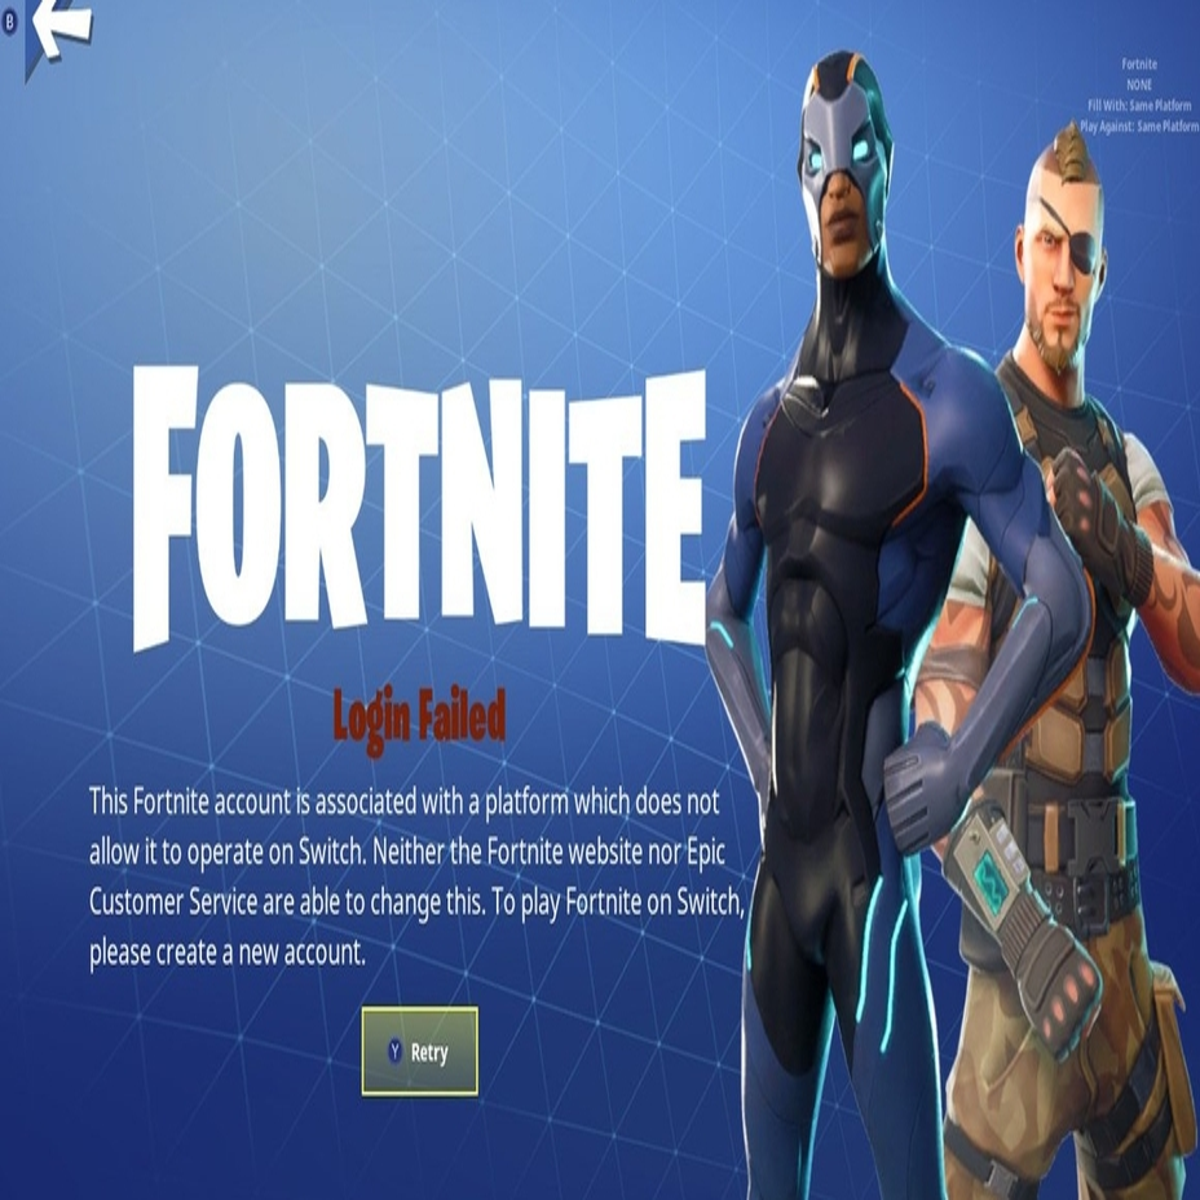 sagsøger Smøre Logisk Fortnite blocks you playing on Switch if you've already logged in on PS4 |  Eurogamer.net